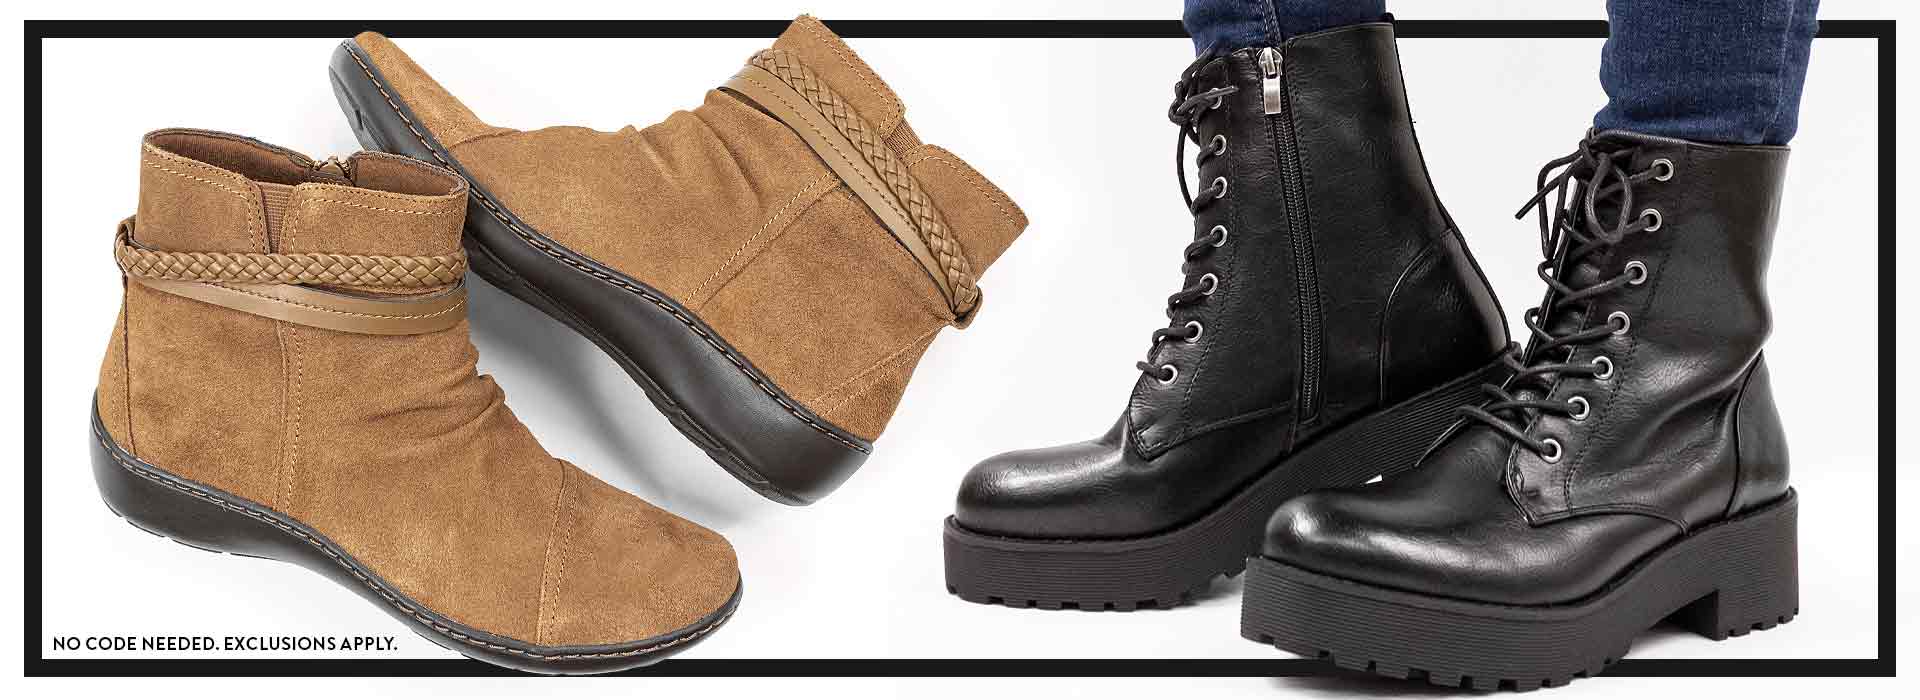 Women's Dress and Casual Boots Extra Savings! Final Day!